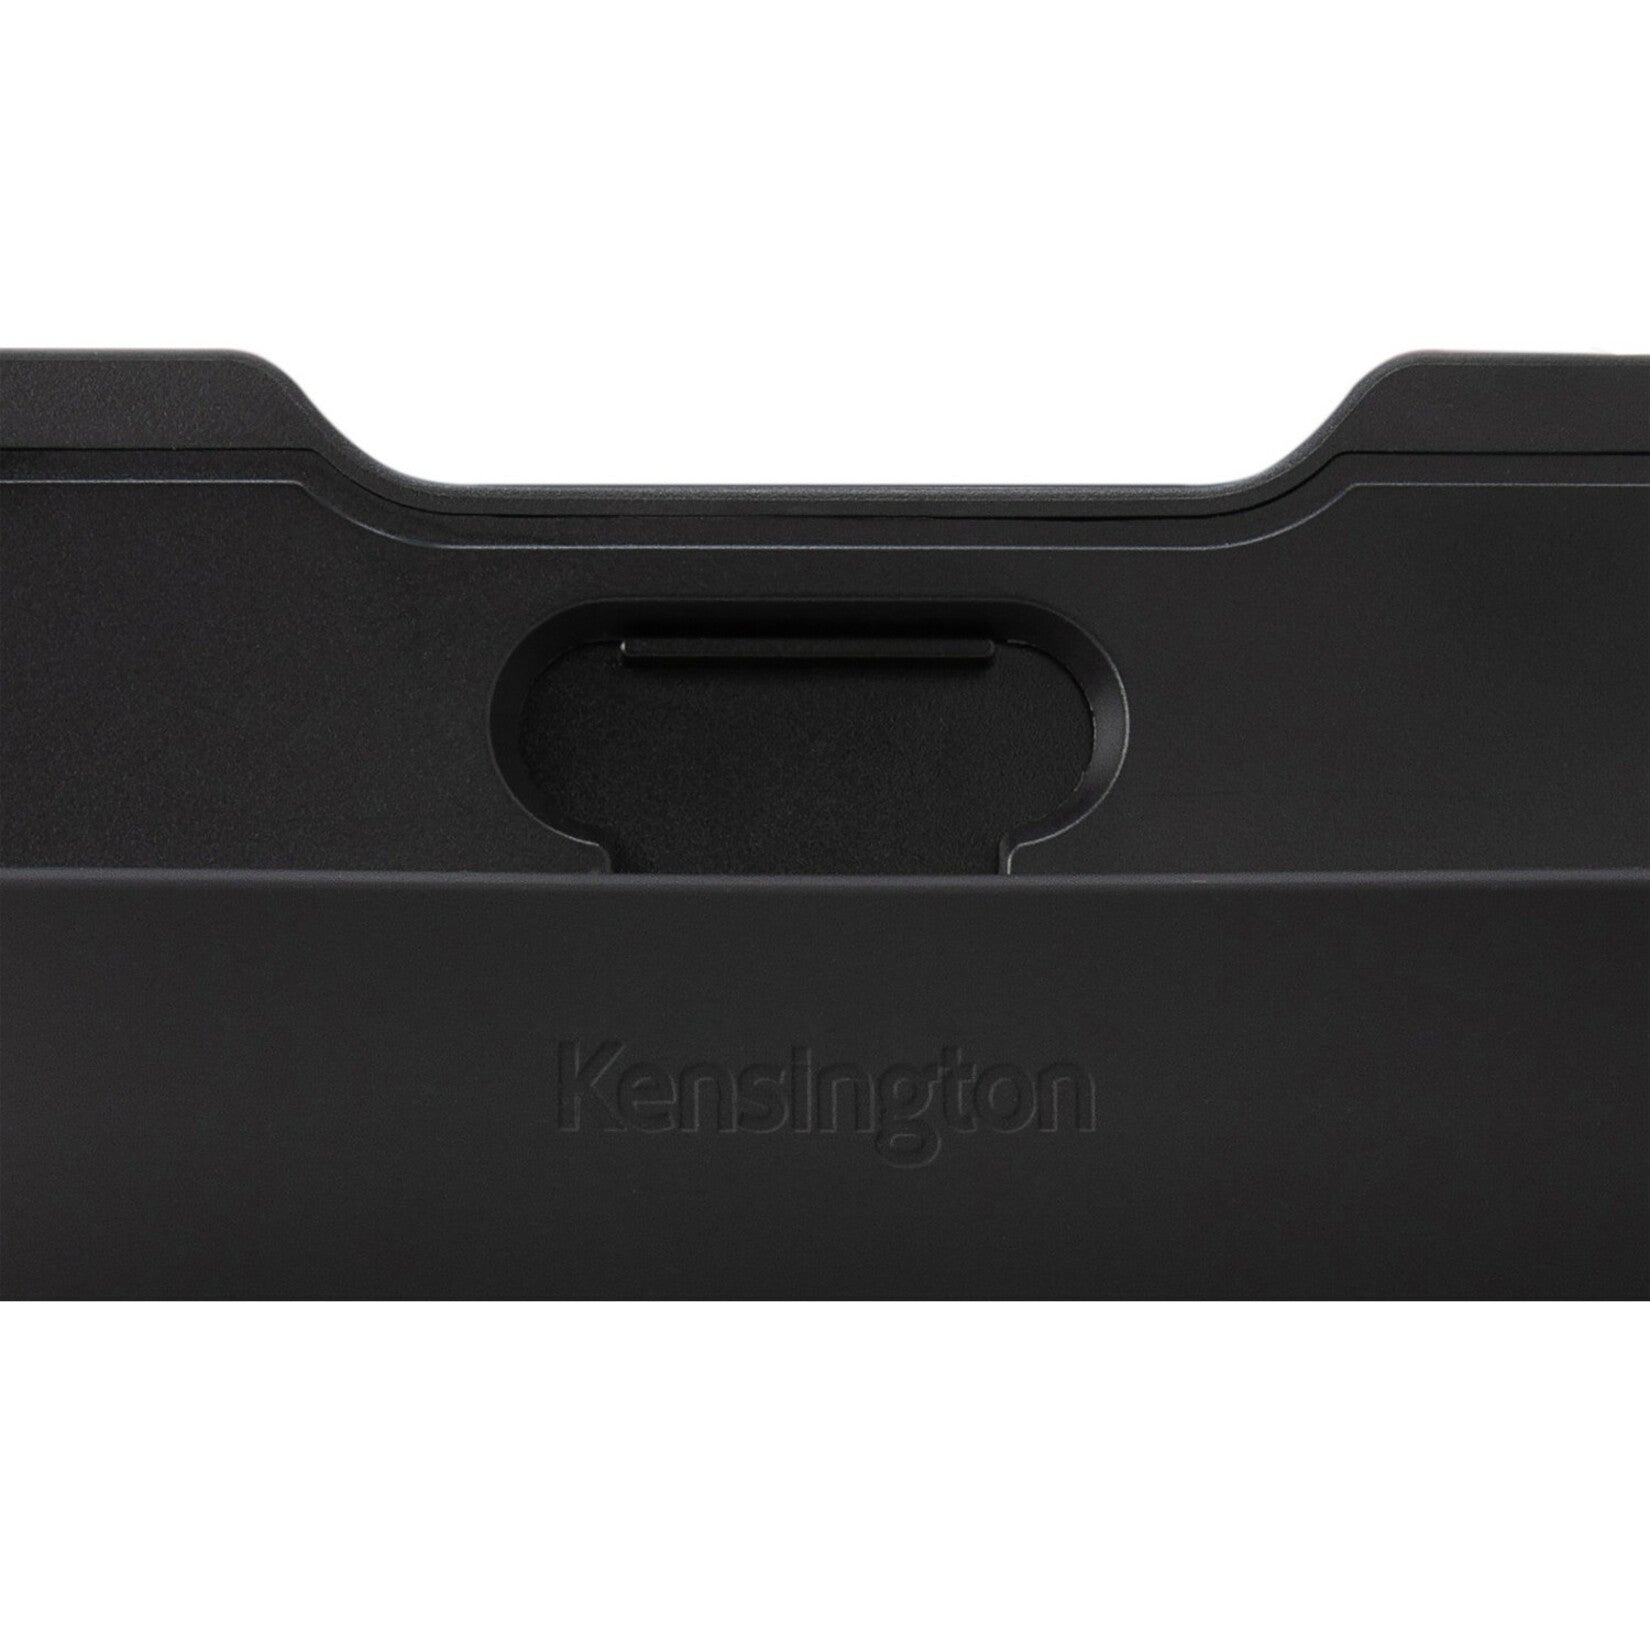 Kensington K97550WW BlackBelt Rugged Case with Integrated CAC Reader for Surface Pro 7/6/5/4, Drop Resistant, Hand Strap